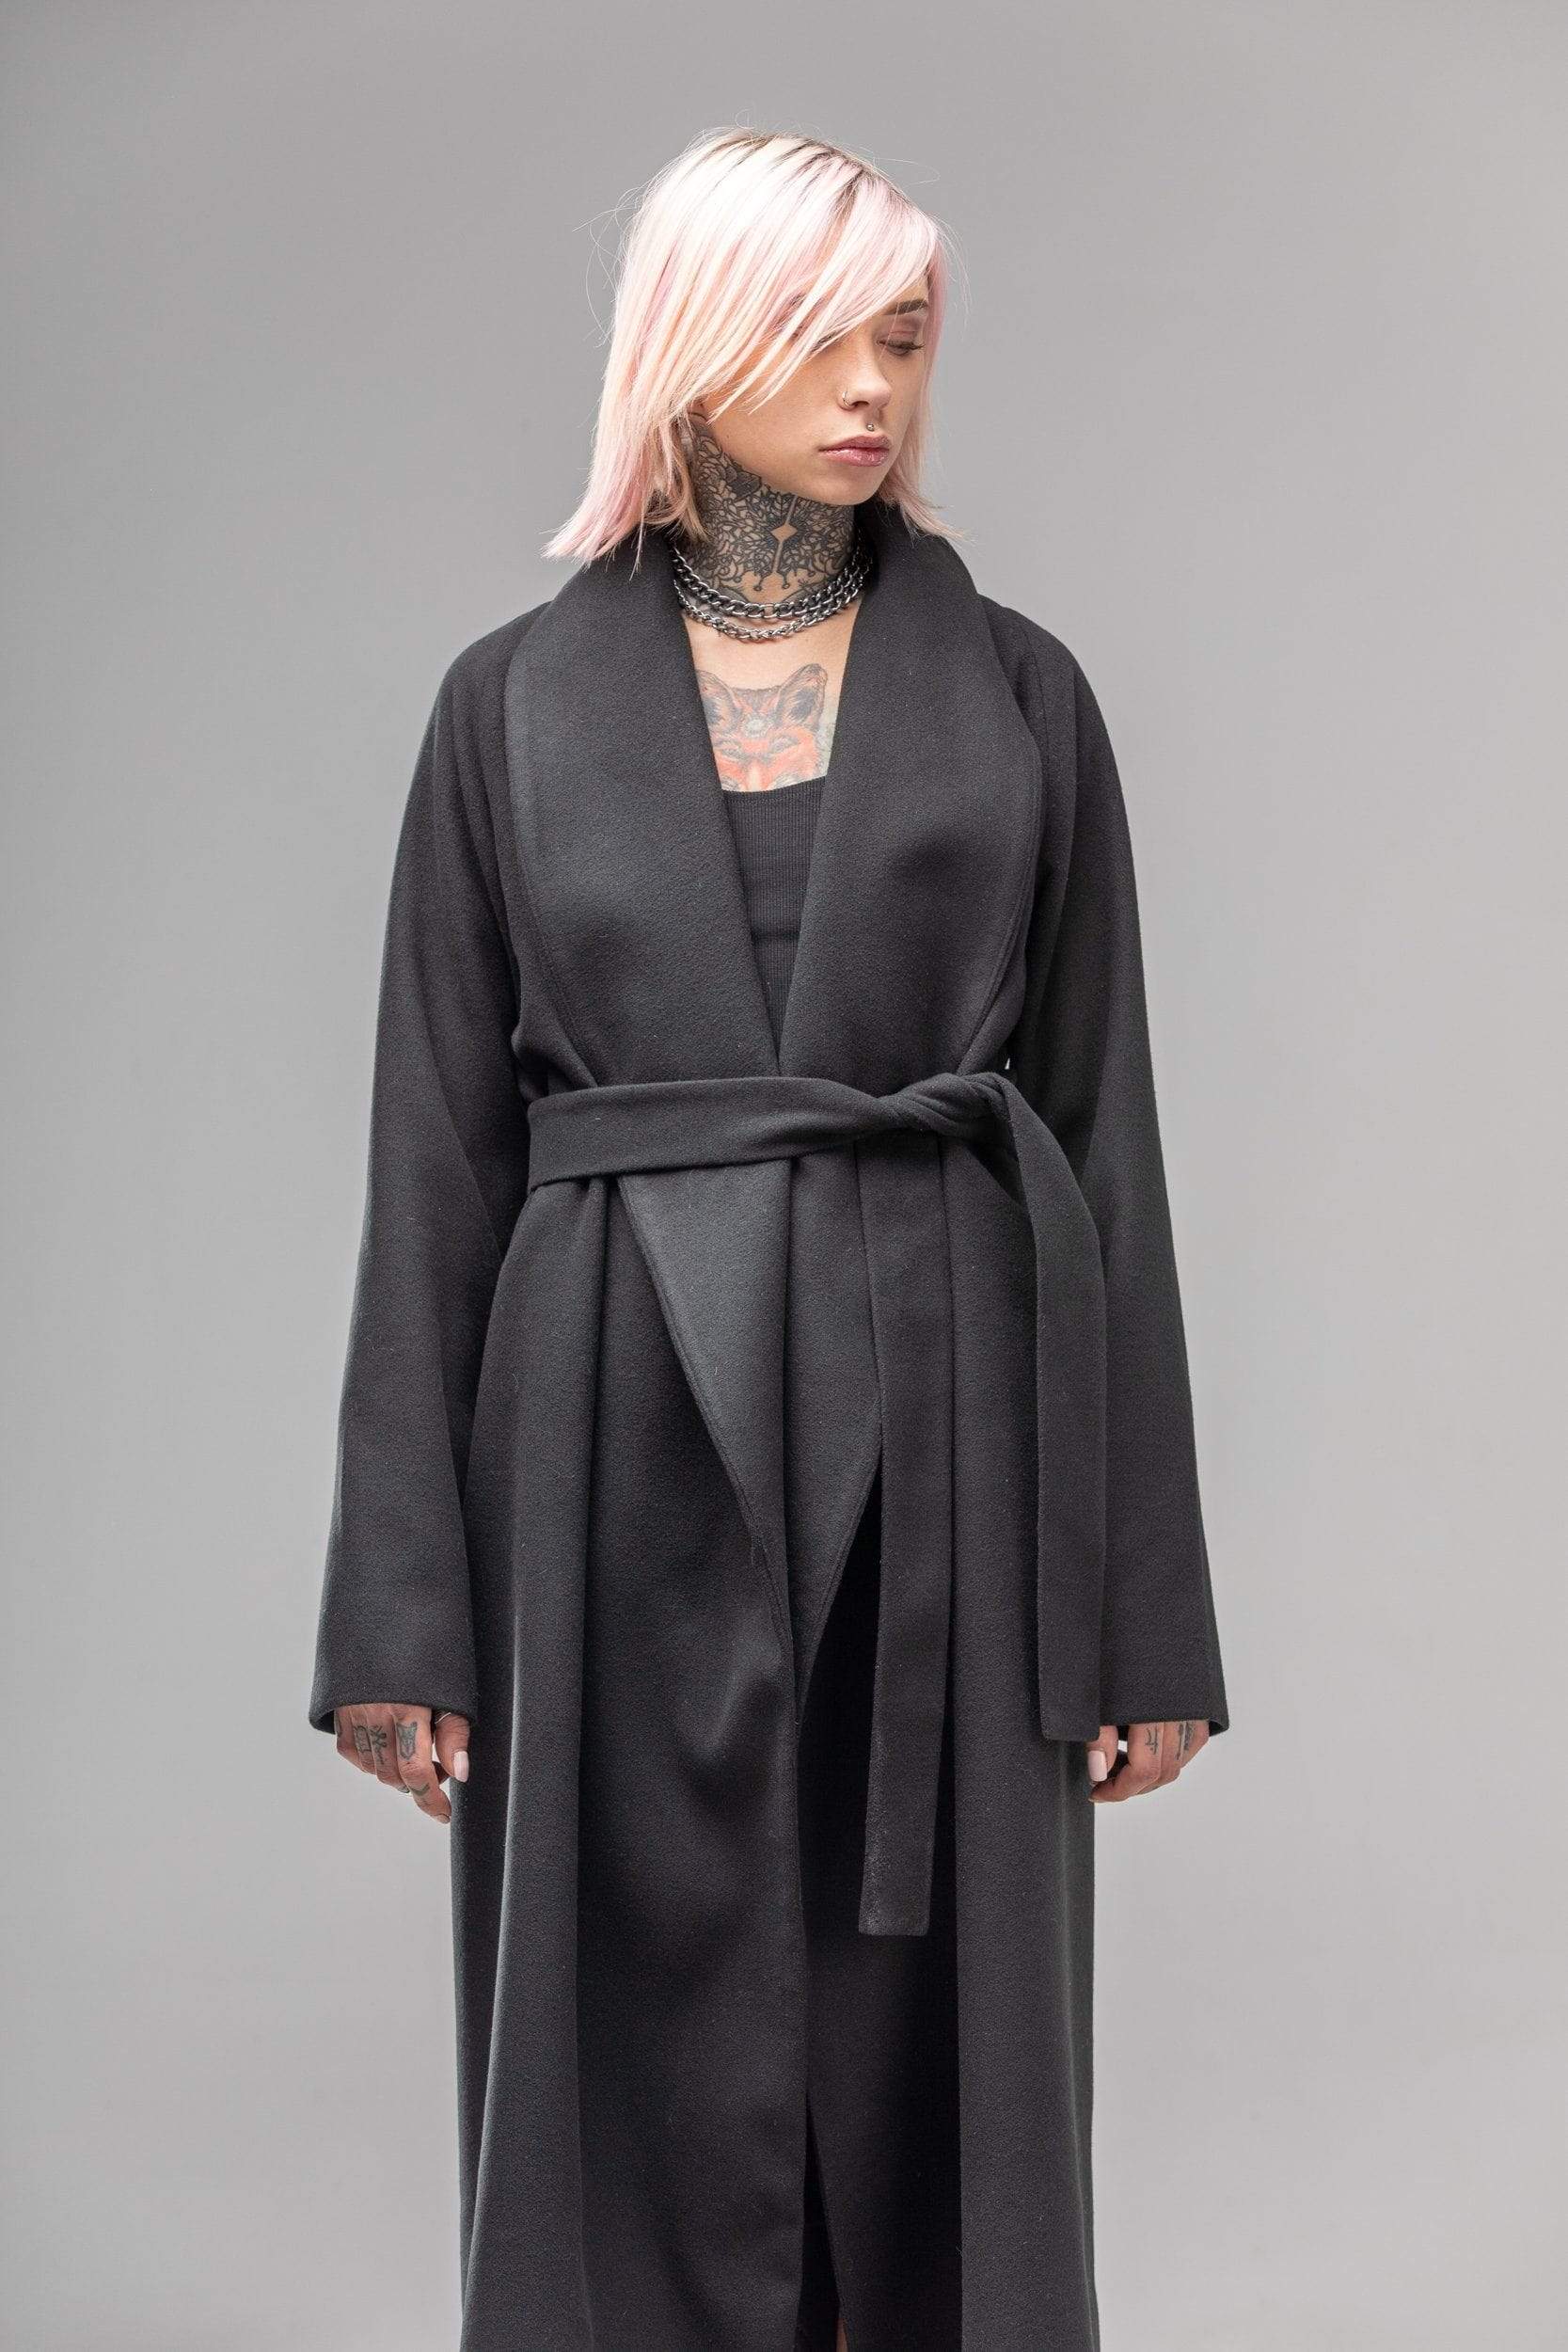 MDNT45 Coats & Jackets for Woman Winter Belted Maxi Coat